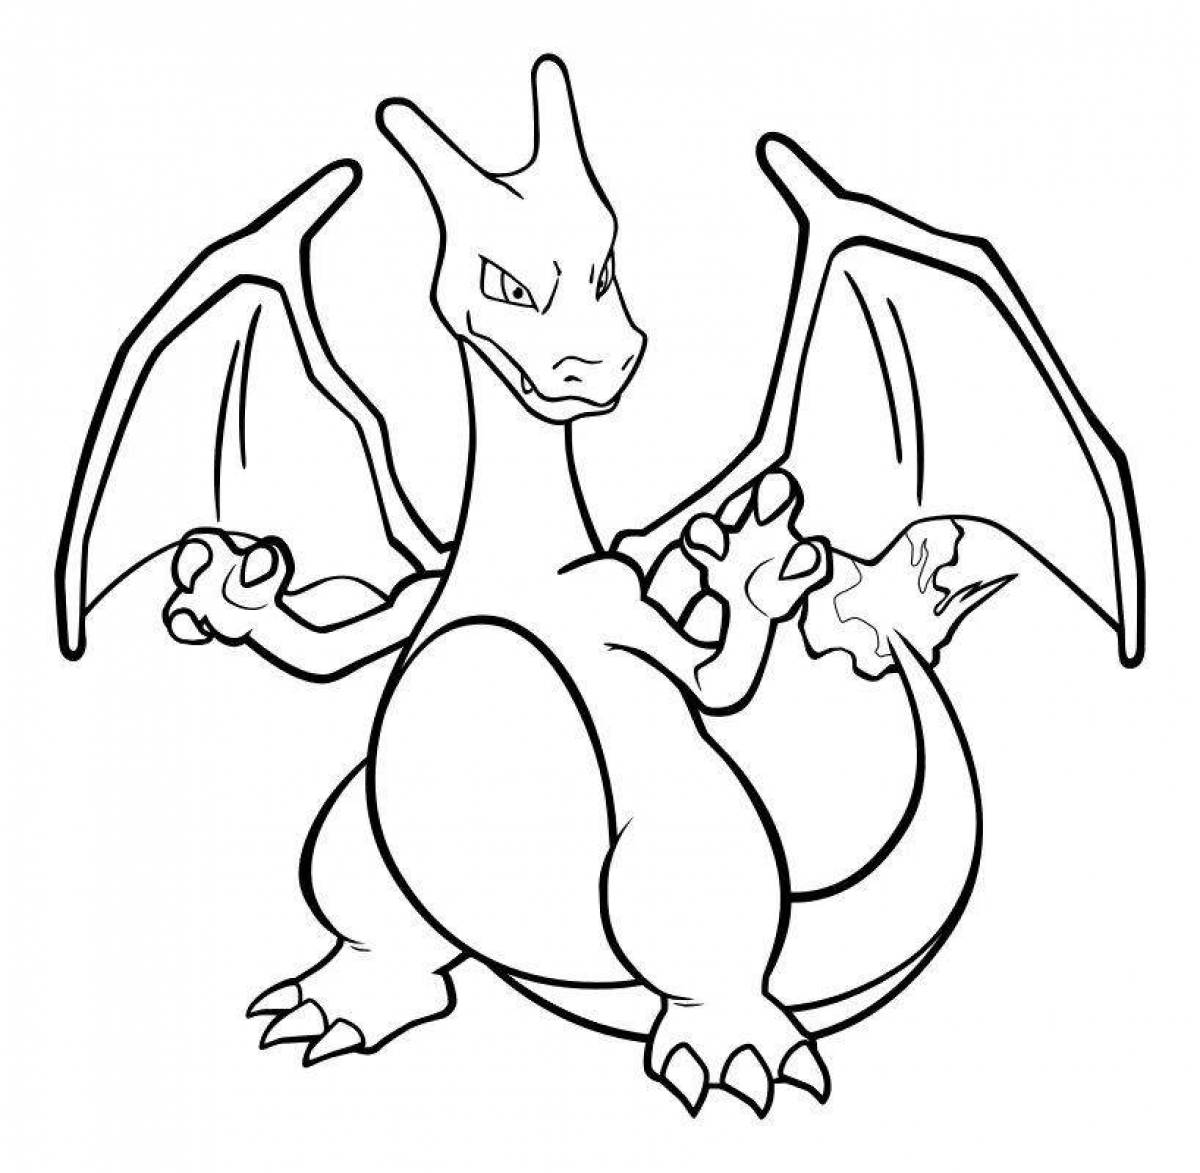 Charizard playful coloring